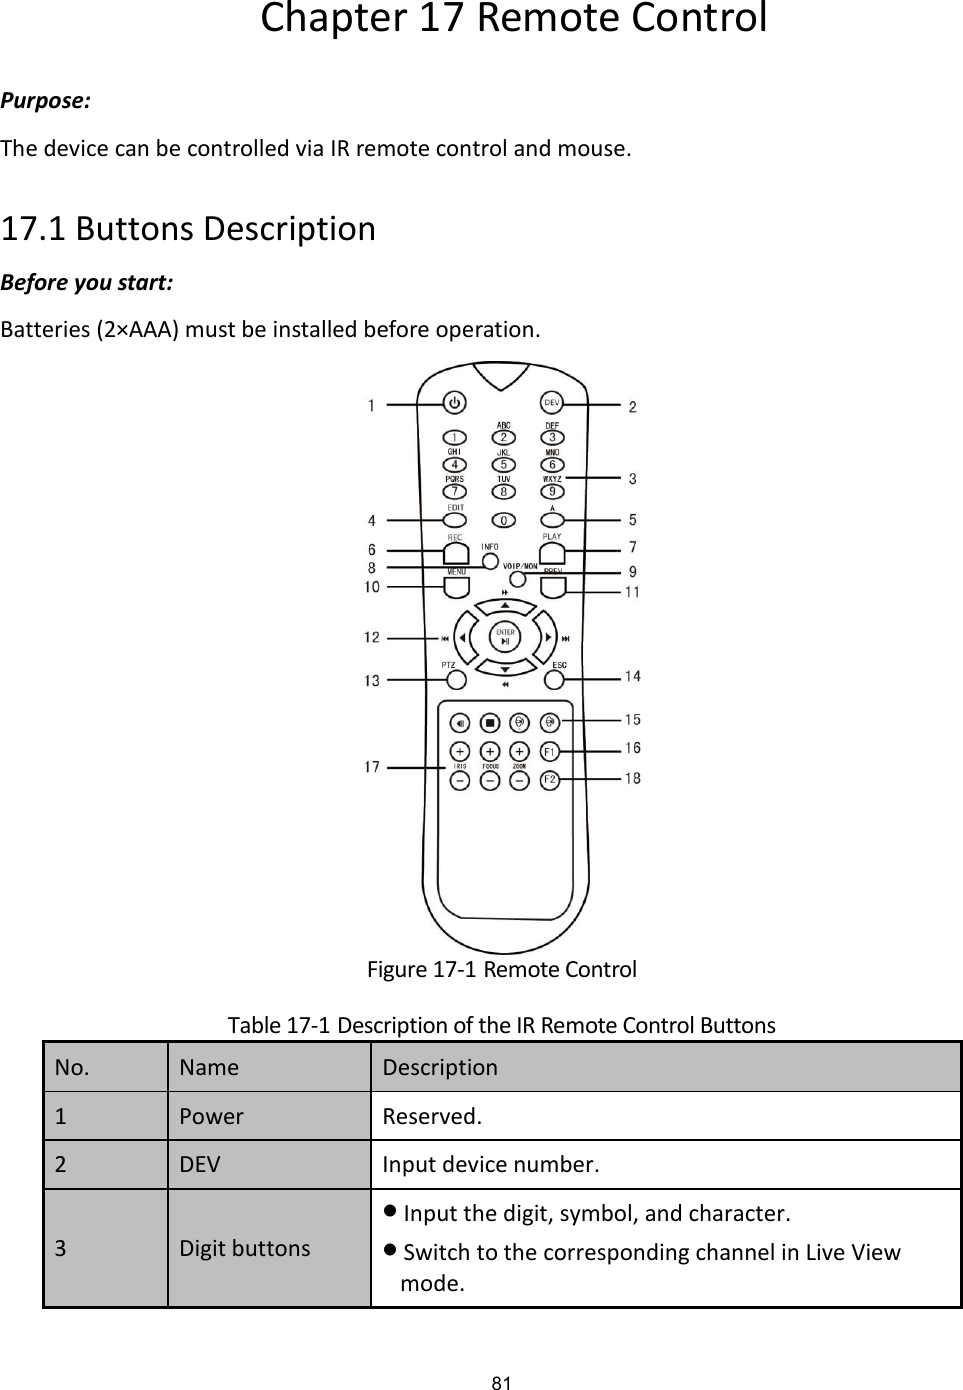 81 Chapter 17 Remote Control Purpose: The device can be controlled via IR remote control and mouse. 17.1 Buttons Description Before you start: Batteries (2×AAA) must be installed before operation.  Figure 17-1 Remote Control Table 17-1 Description of the IR Remote Control Buttons No. Name Description 1 Power Reserved. 2 DEV Input device number. 3 Digit buttons  Input the digit, symbol, and character.  Switch to the corresponding channel in Live View mode. 